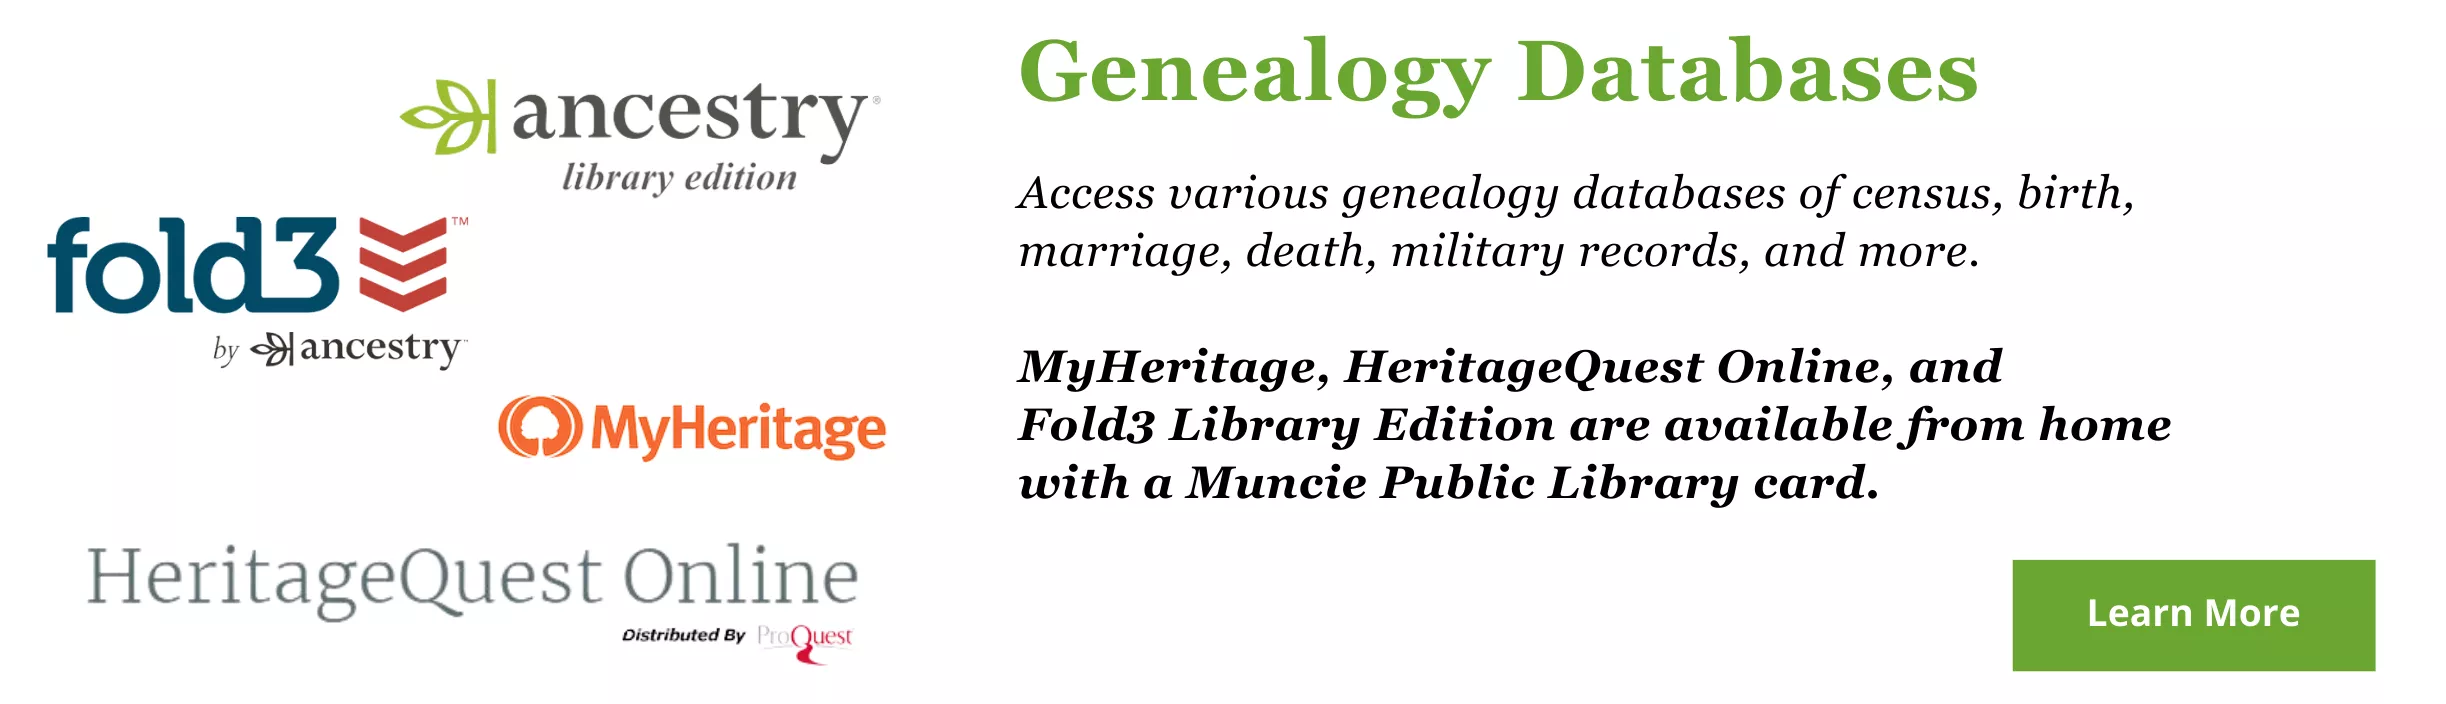 MPL Genealogy Databases include: Ancestry Library Edition, Fold3 Library Edition, MyHeritage, and HeritageQuest Online